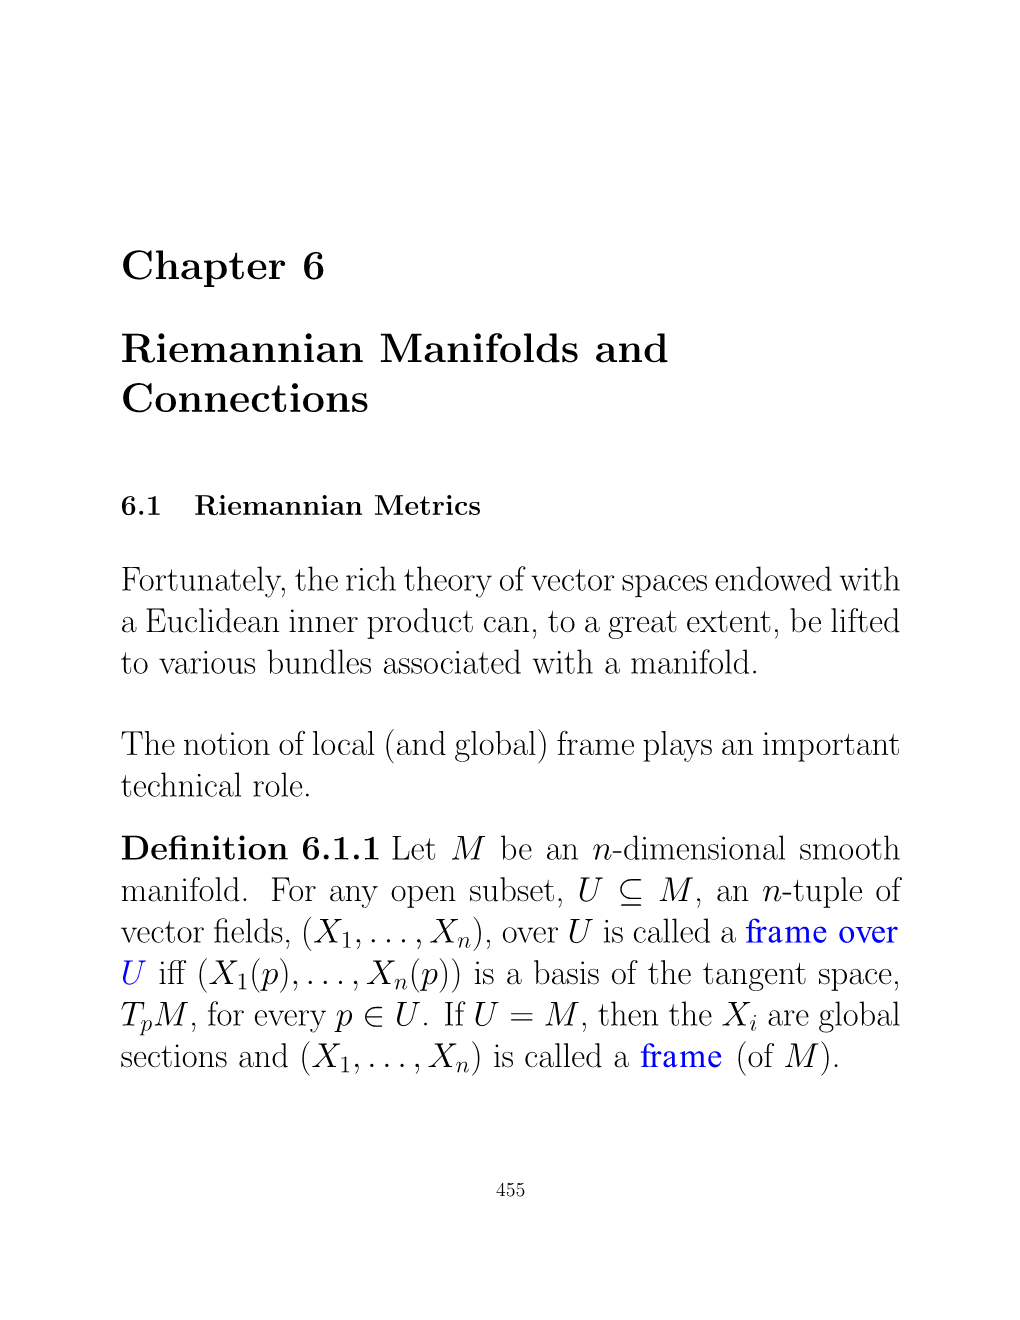 Riemannian Manifolds and Connections